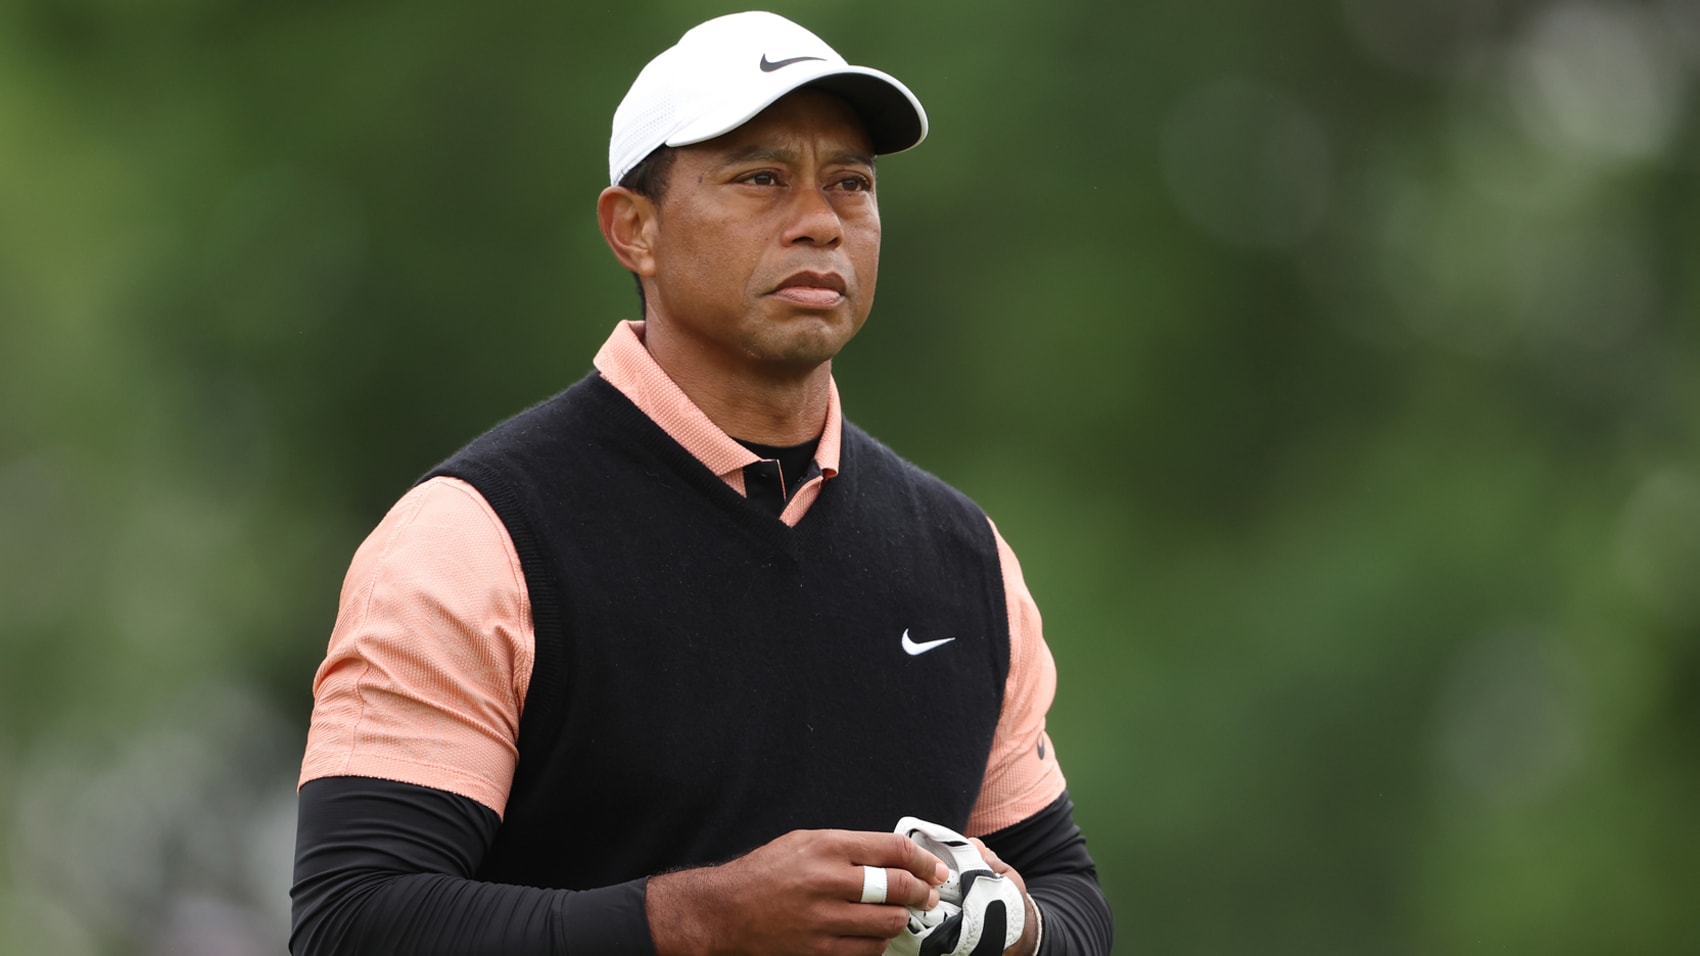 Tiger Woods announced on Twitter that he will not be competing at next week's U.S. Open. (Getty Images)